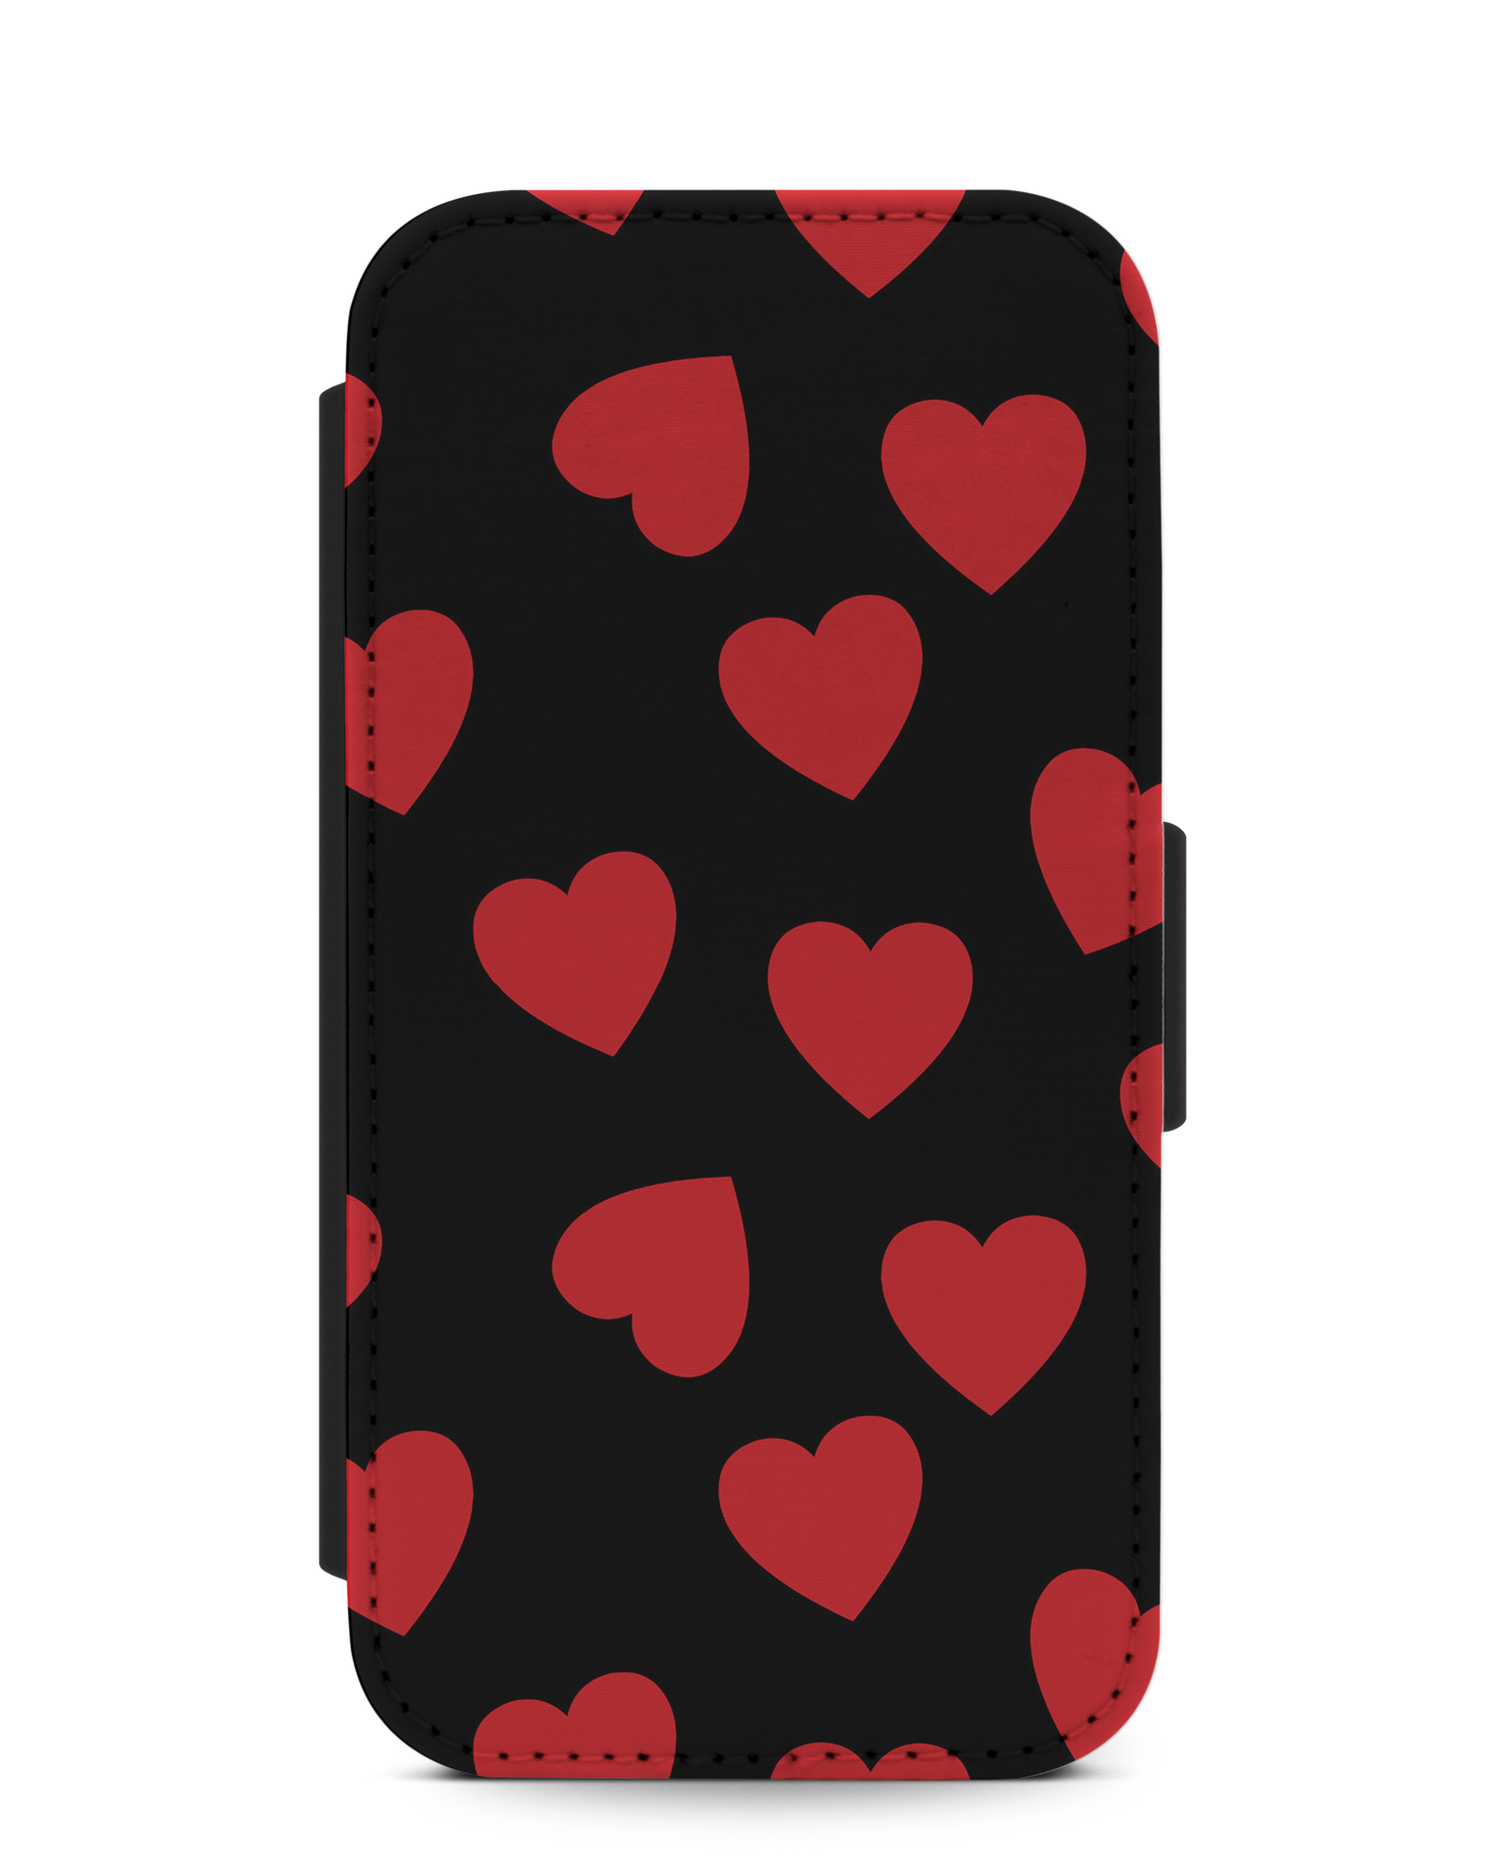 Repeating Hearts Handy Klapphülle Apple iPhone 7, Apple iPhone 8, Apple iPhone SE (2020), Apple iPhone SE (2022): Vorderansicht